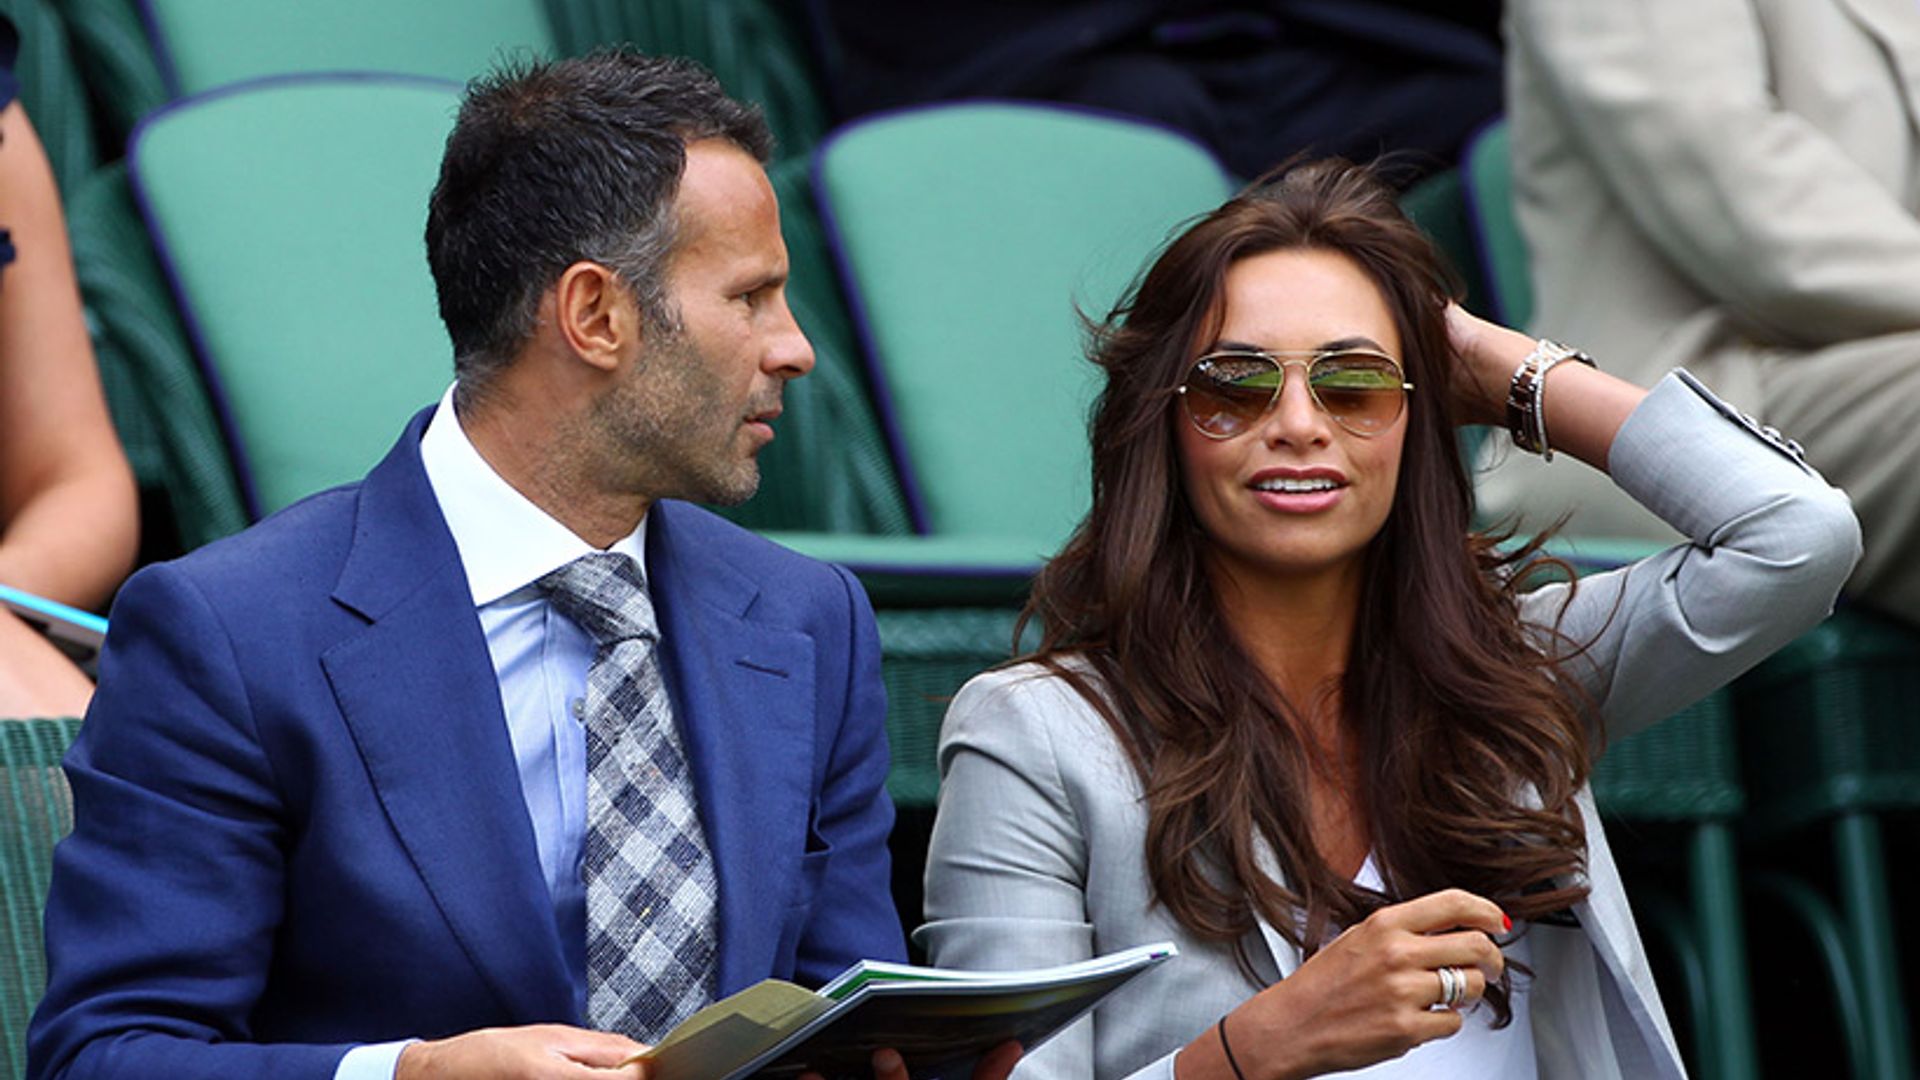 Ryan Giggs and wife divorce after ten years